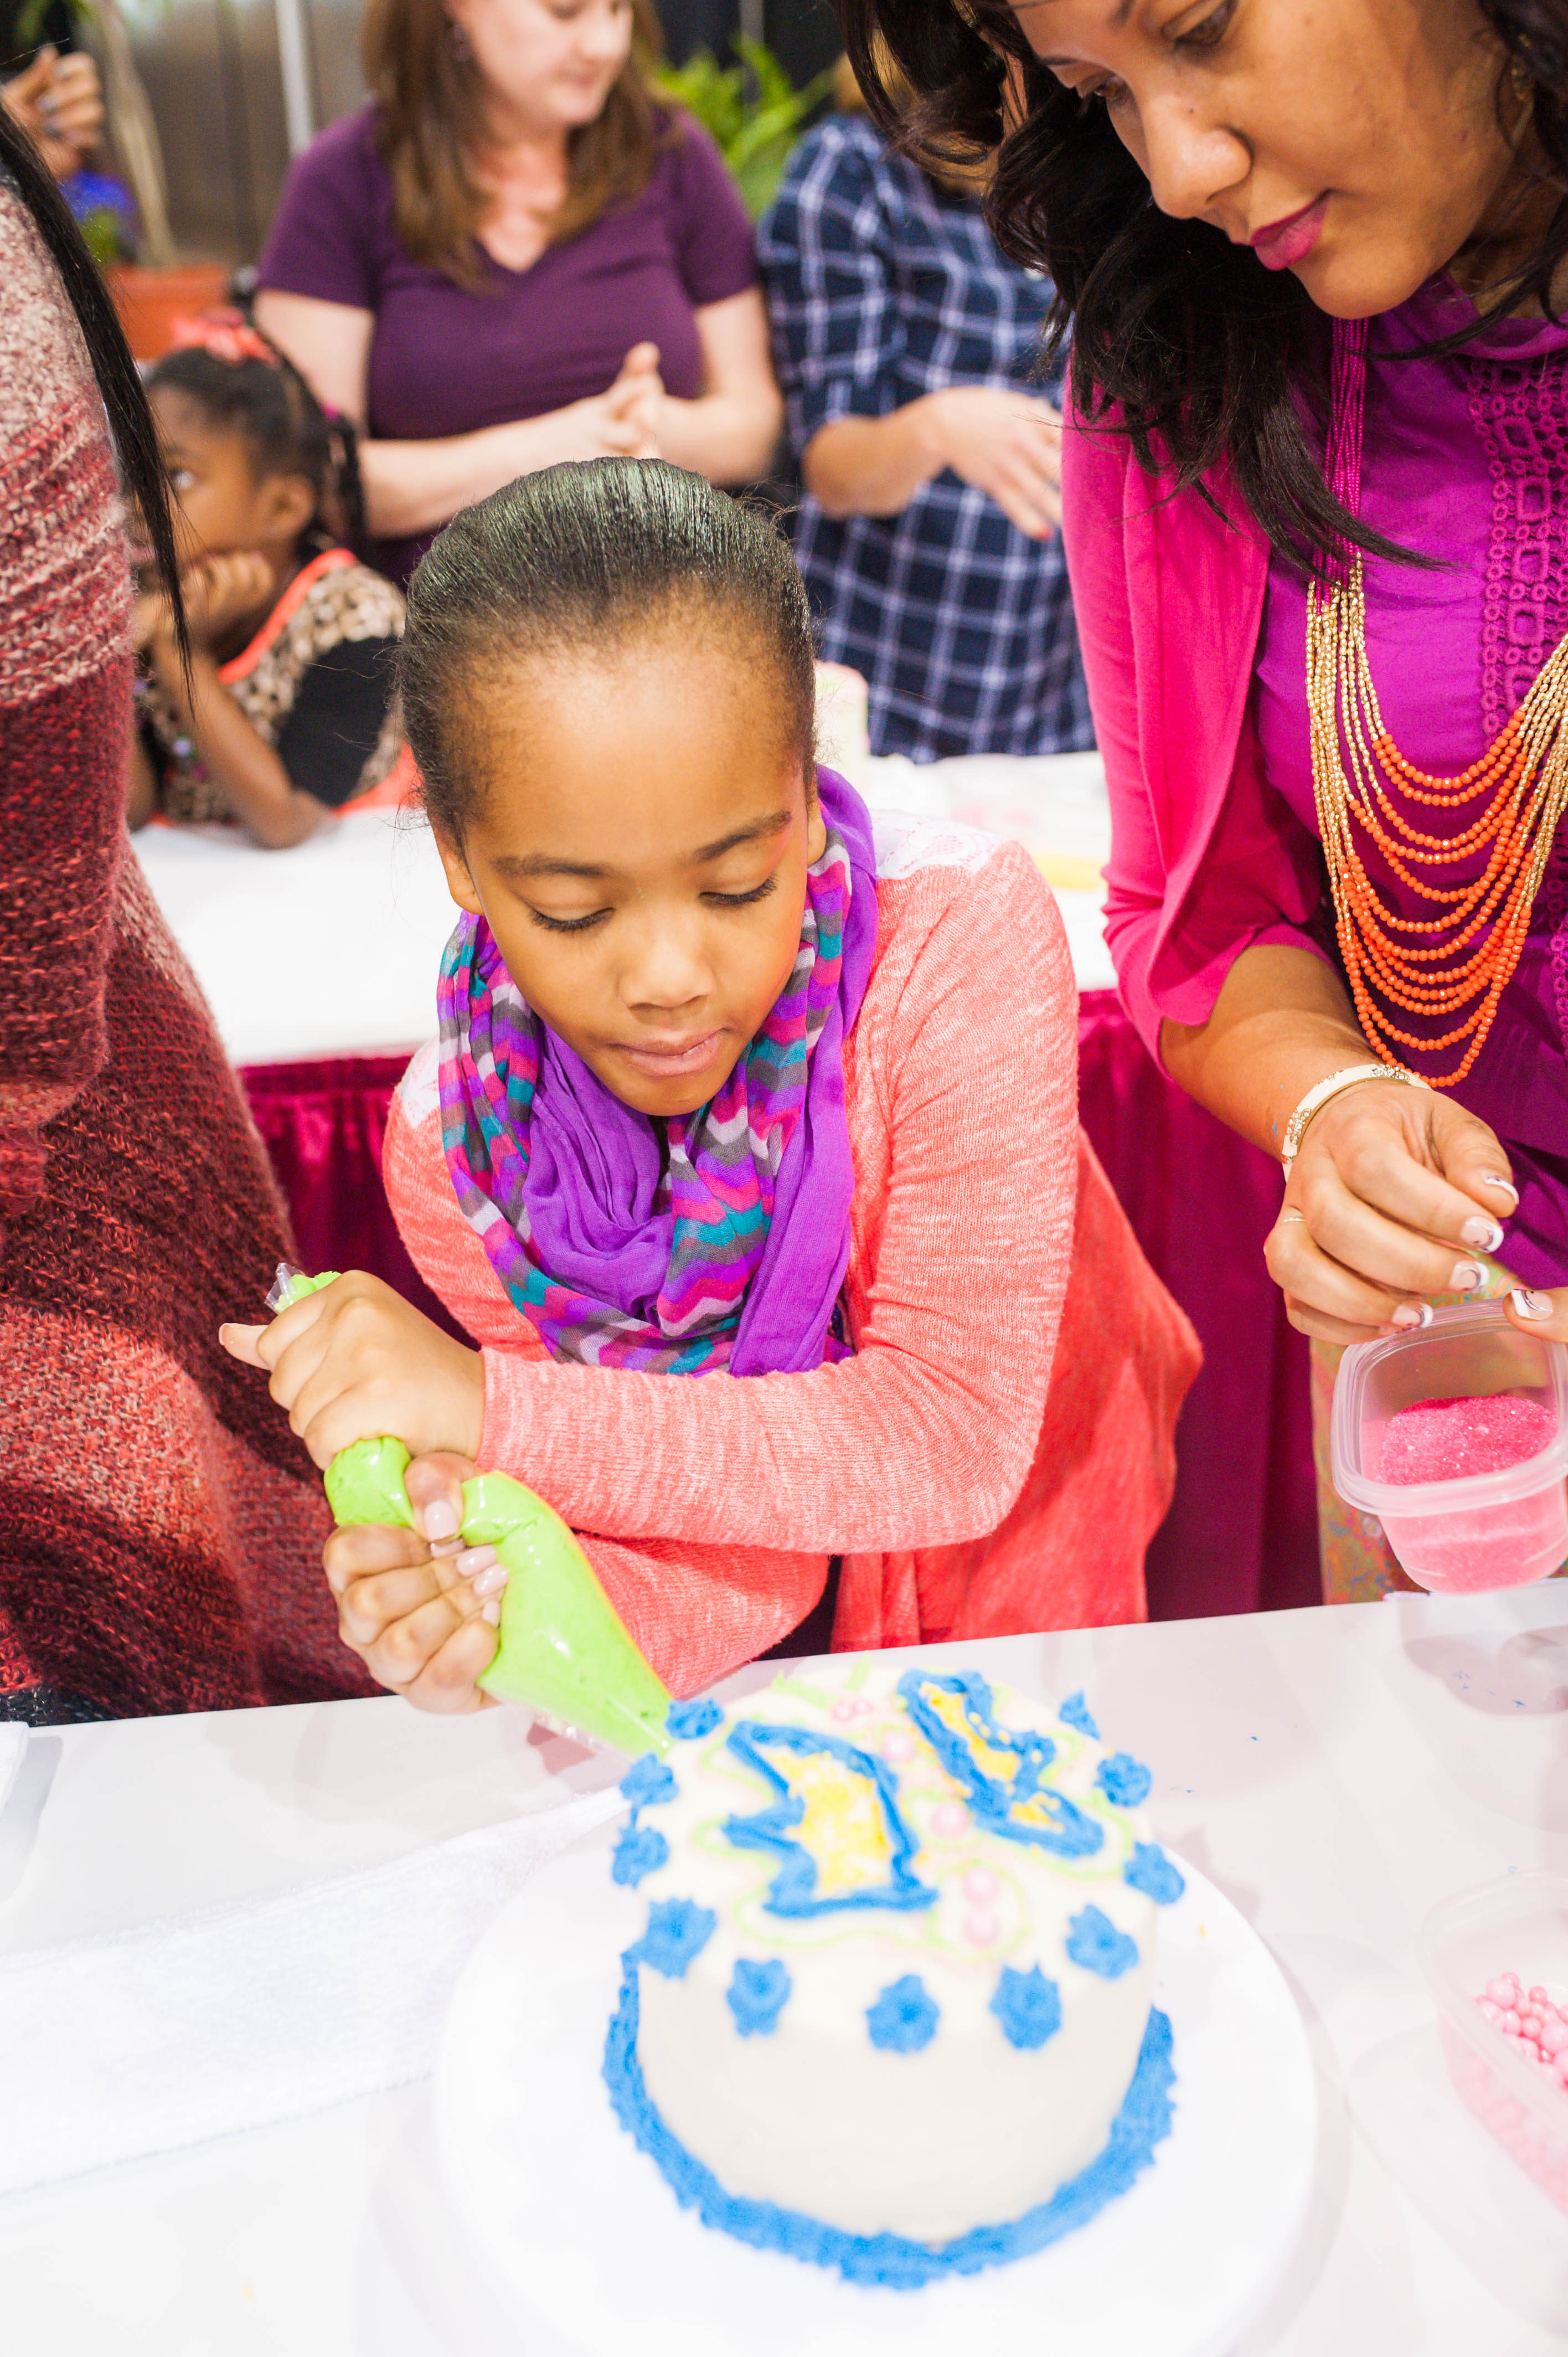 Sunday’s Mother Daughter Day features a cupcake decorating contest at Michigan International Women’s Show